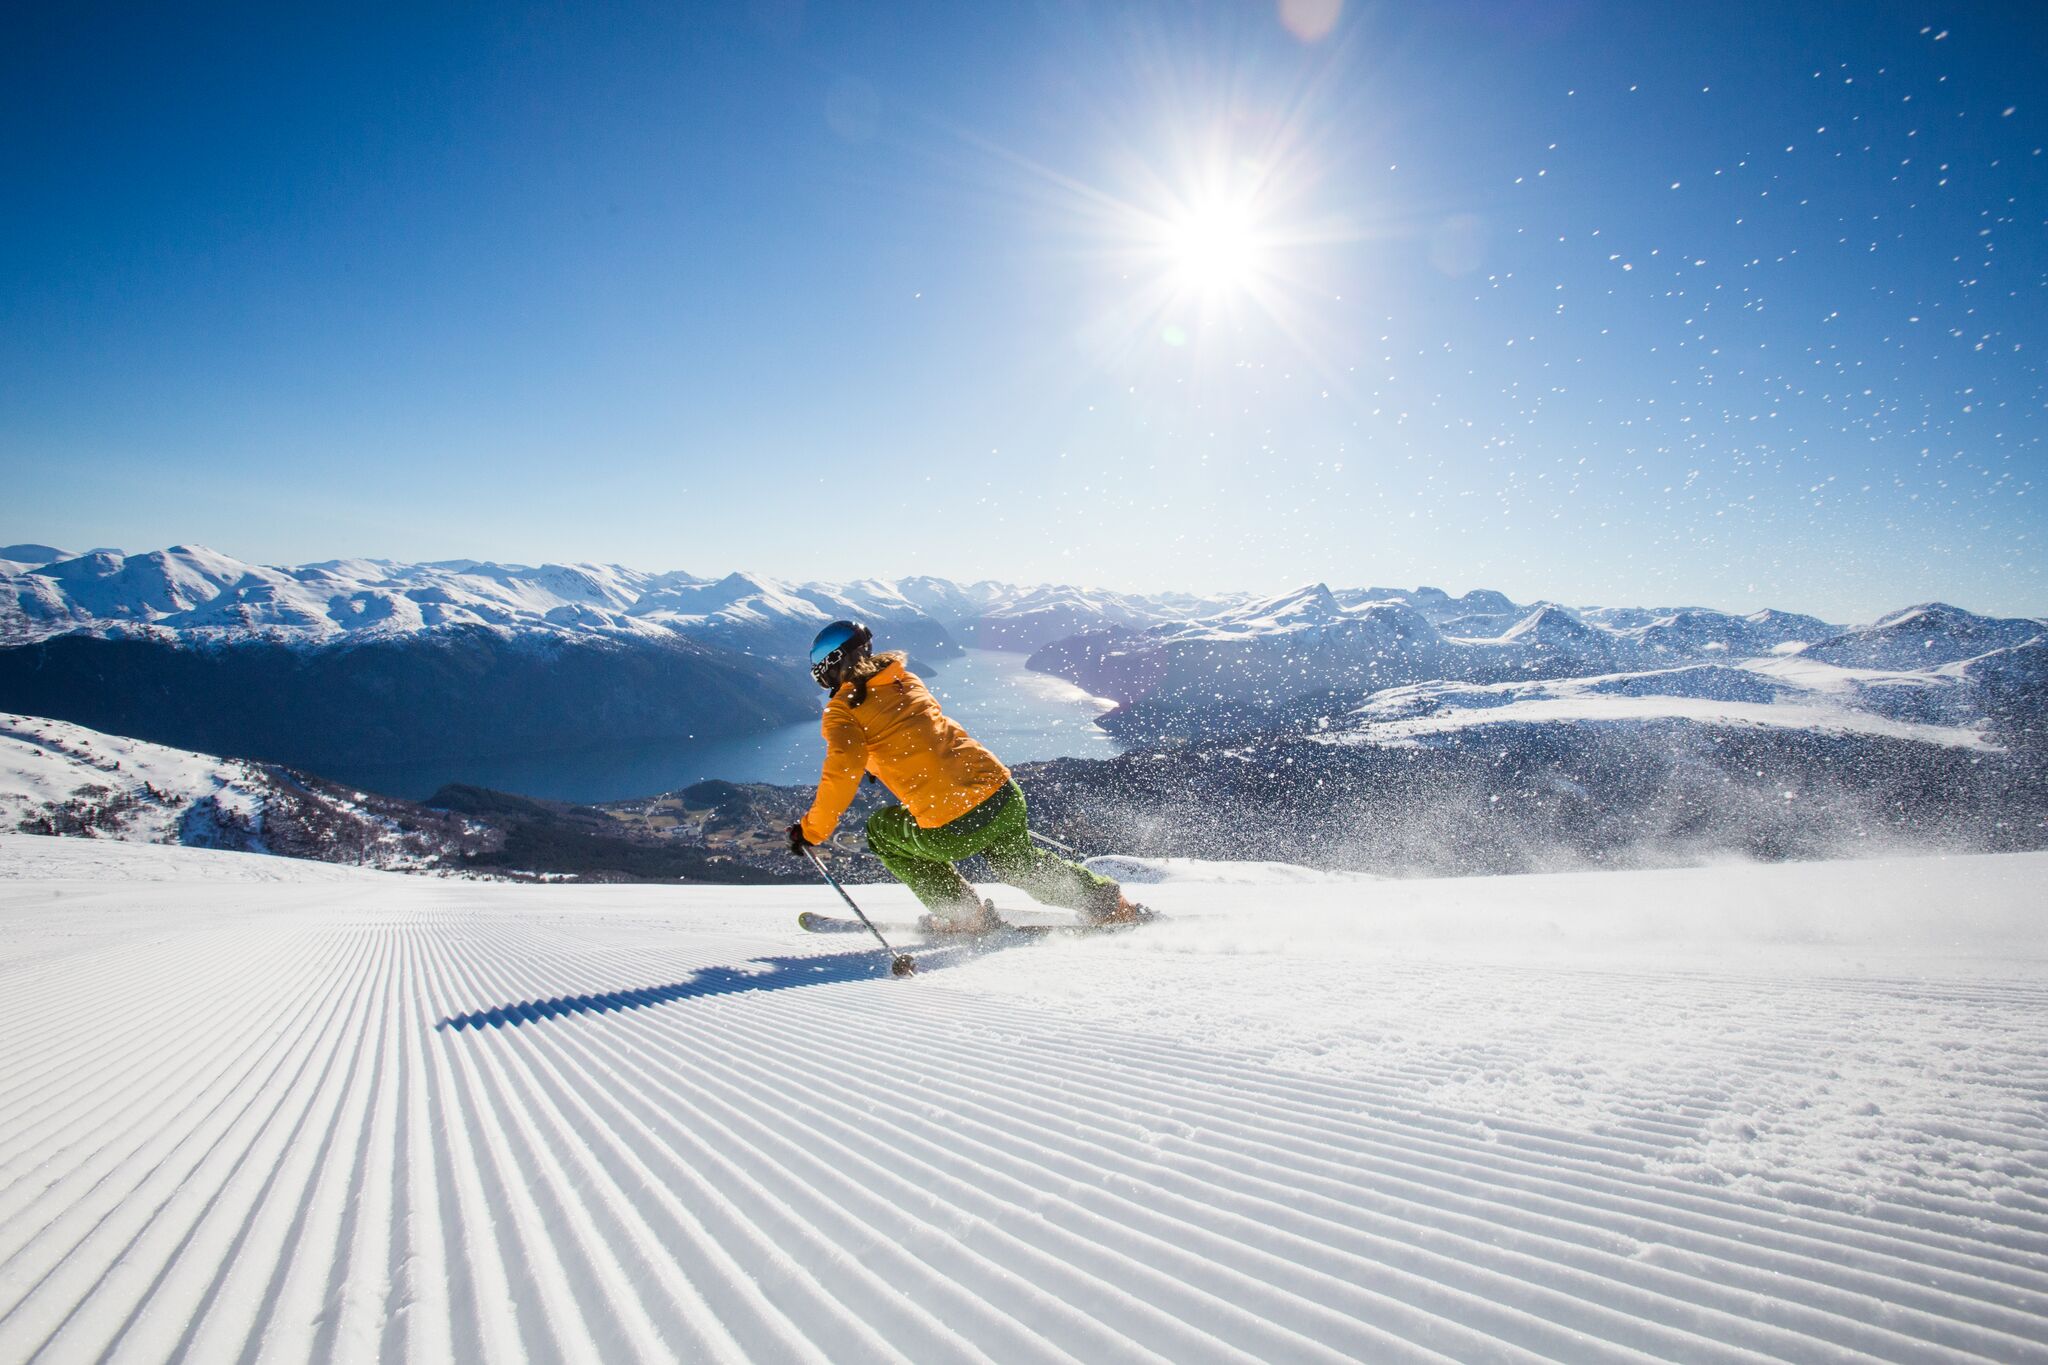 Norway's best ski resorts | Plan your skiing holiday